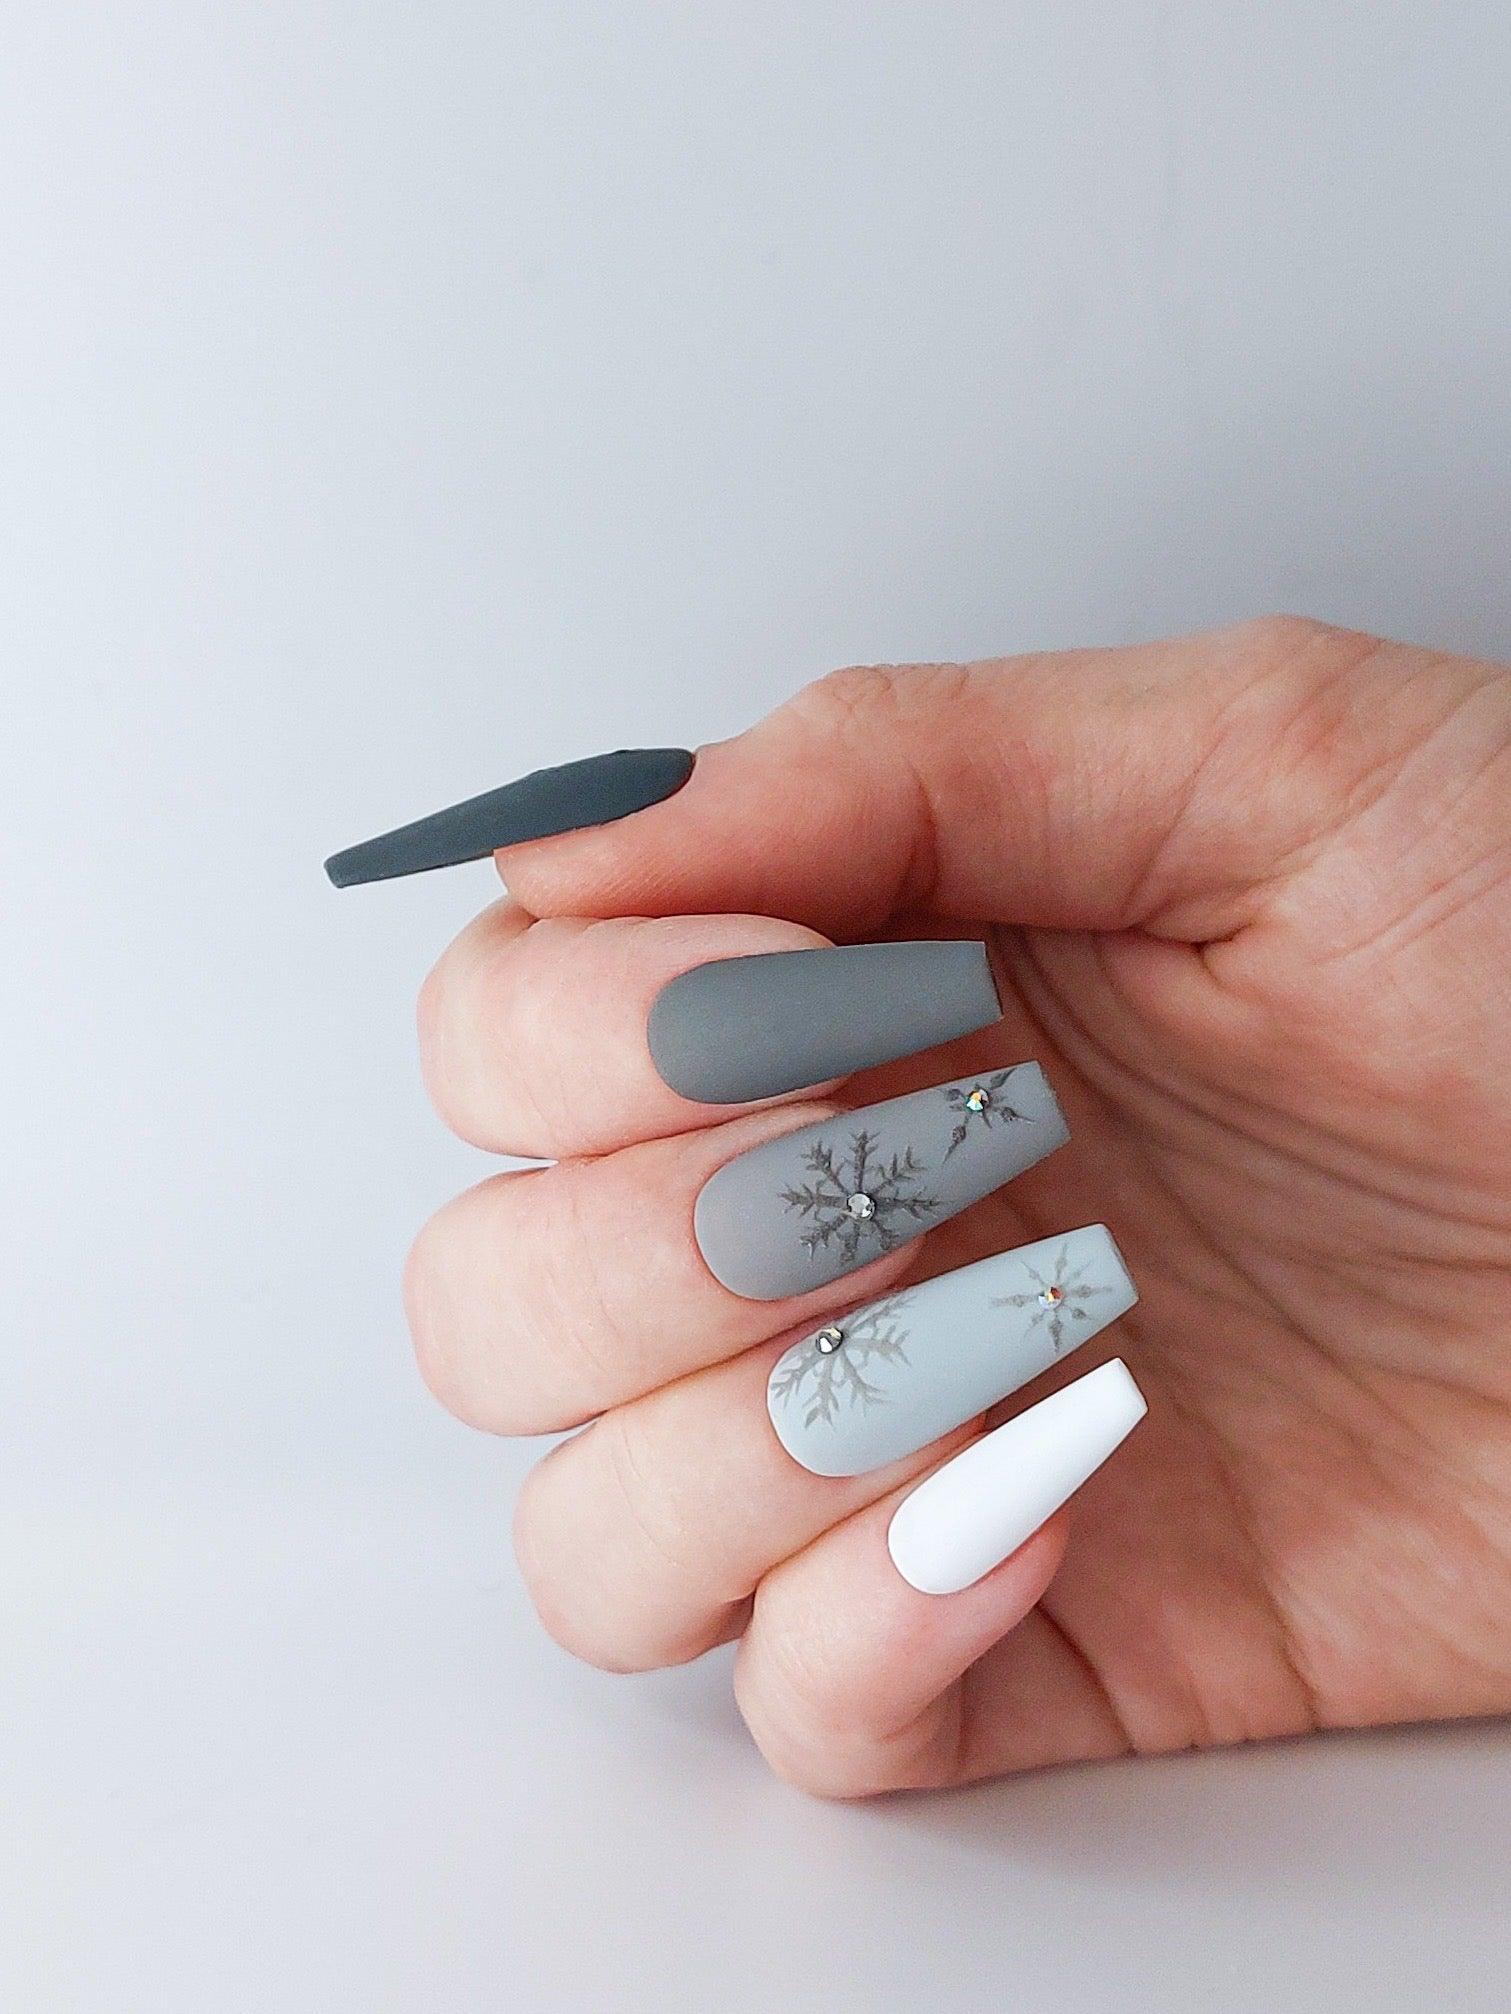 Soft Snowfall | Grey Palette Snowflake Press on Nails with Black Diamonds in Matte Finish - FancyB Press-on Nails